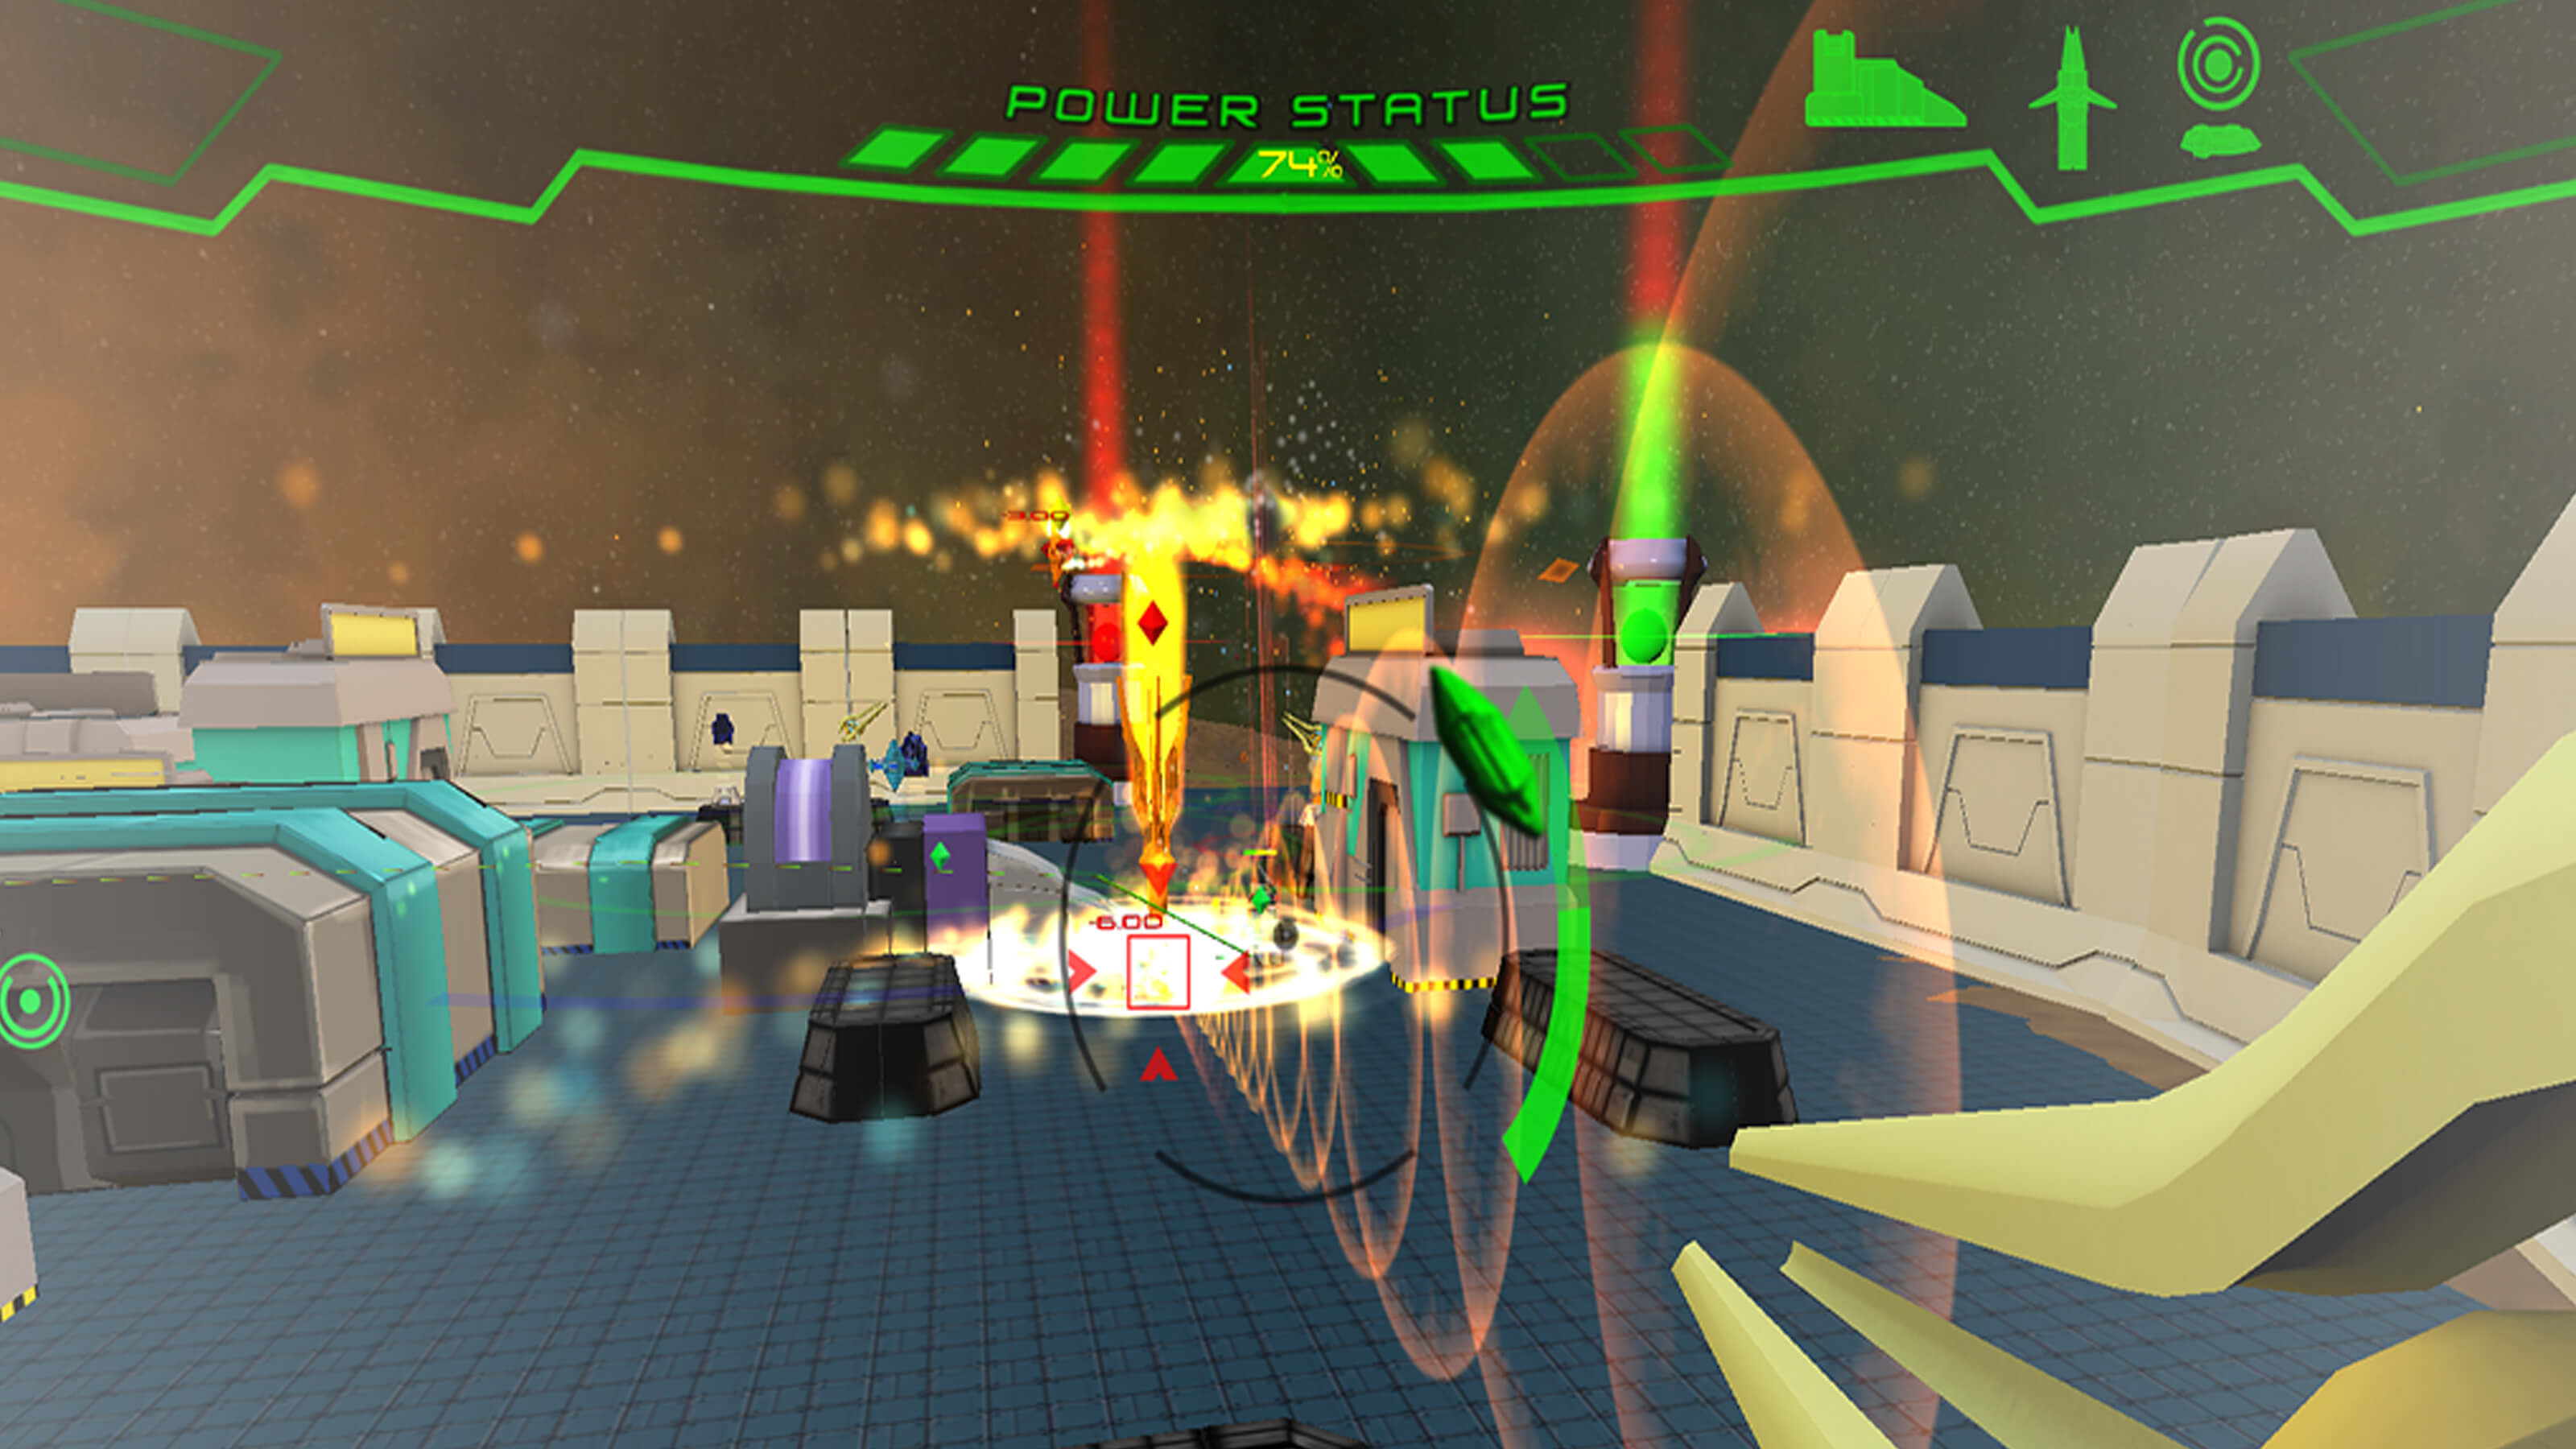 Player's first-person view of the playable area. Turrets, particles, and a HUD fill the screen.